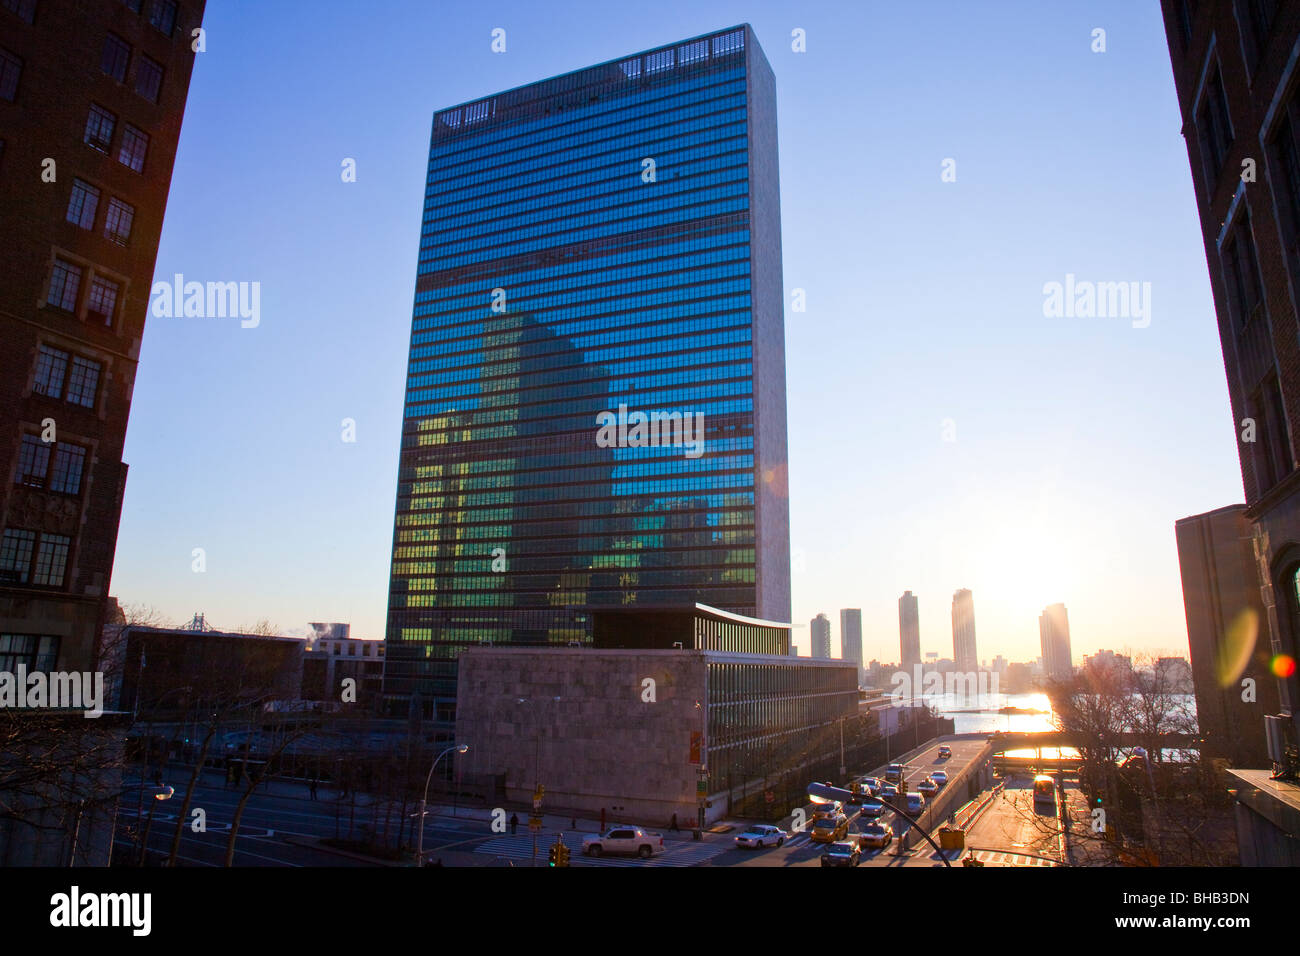 United Nations Building in Manhattan, New York City Stock Photo